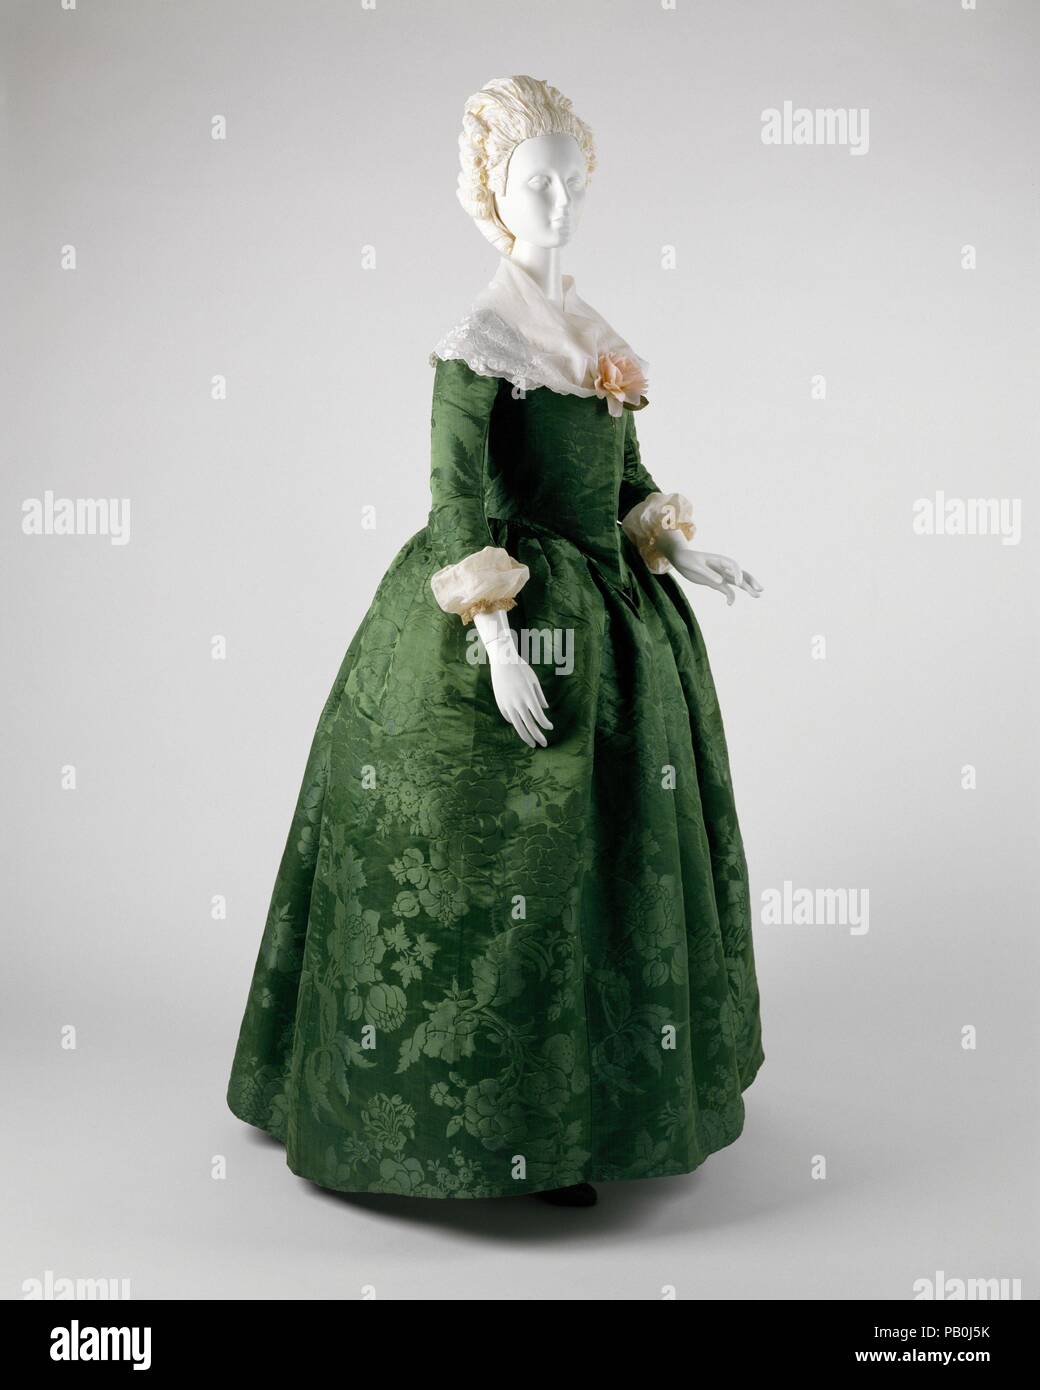 Ensemble. Culture: American. Date: ca. 1775.  This dress is considerably less gaudy than continental and English clothing of the period. Yet, it is not lacking in sumptuousness. Rather, the green Spitalfields damask, attributed to Anna Maria Garthwaite about 1743-45, is richly displayed. The Costume Institute acquired this dress in 1994, knowing that it would be in the Museum's exhibition 'John Singleton Copley's America.' It has since appeared in our show 'The Ceaseless Century.' One could argue that the relative simplicity engenders more delight in the dress's inherent voluptuousness. Genera Stock Photo